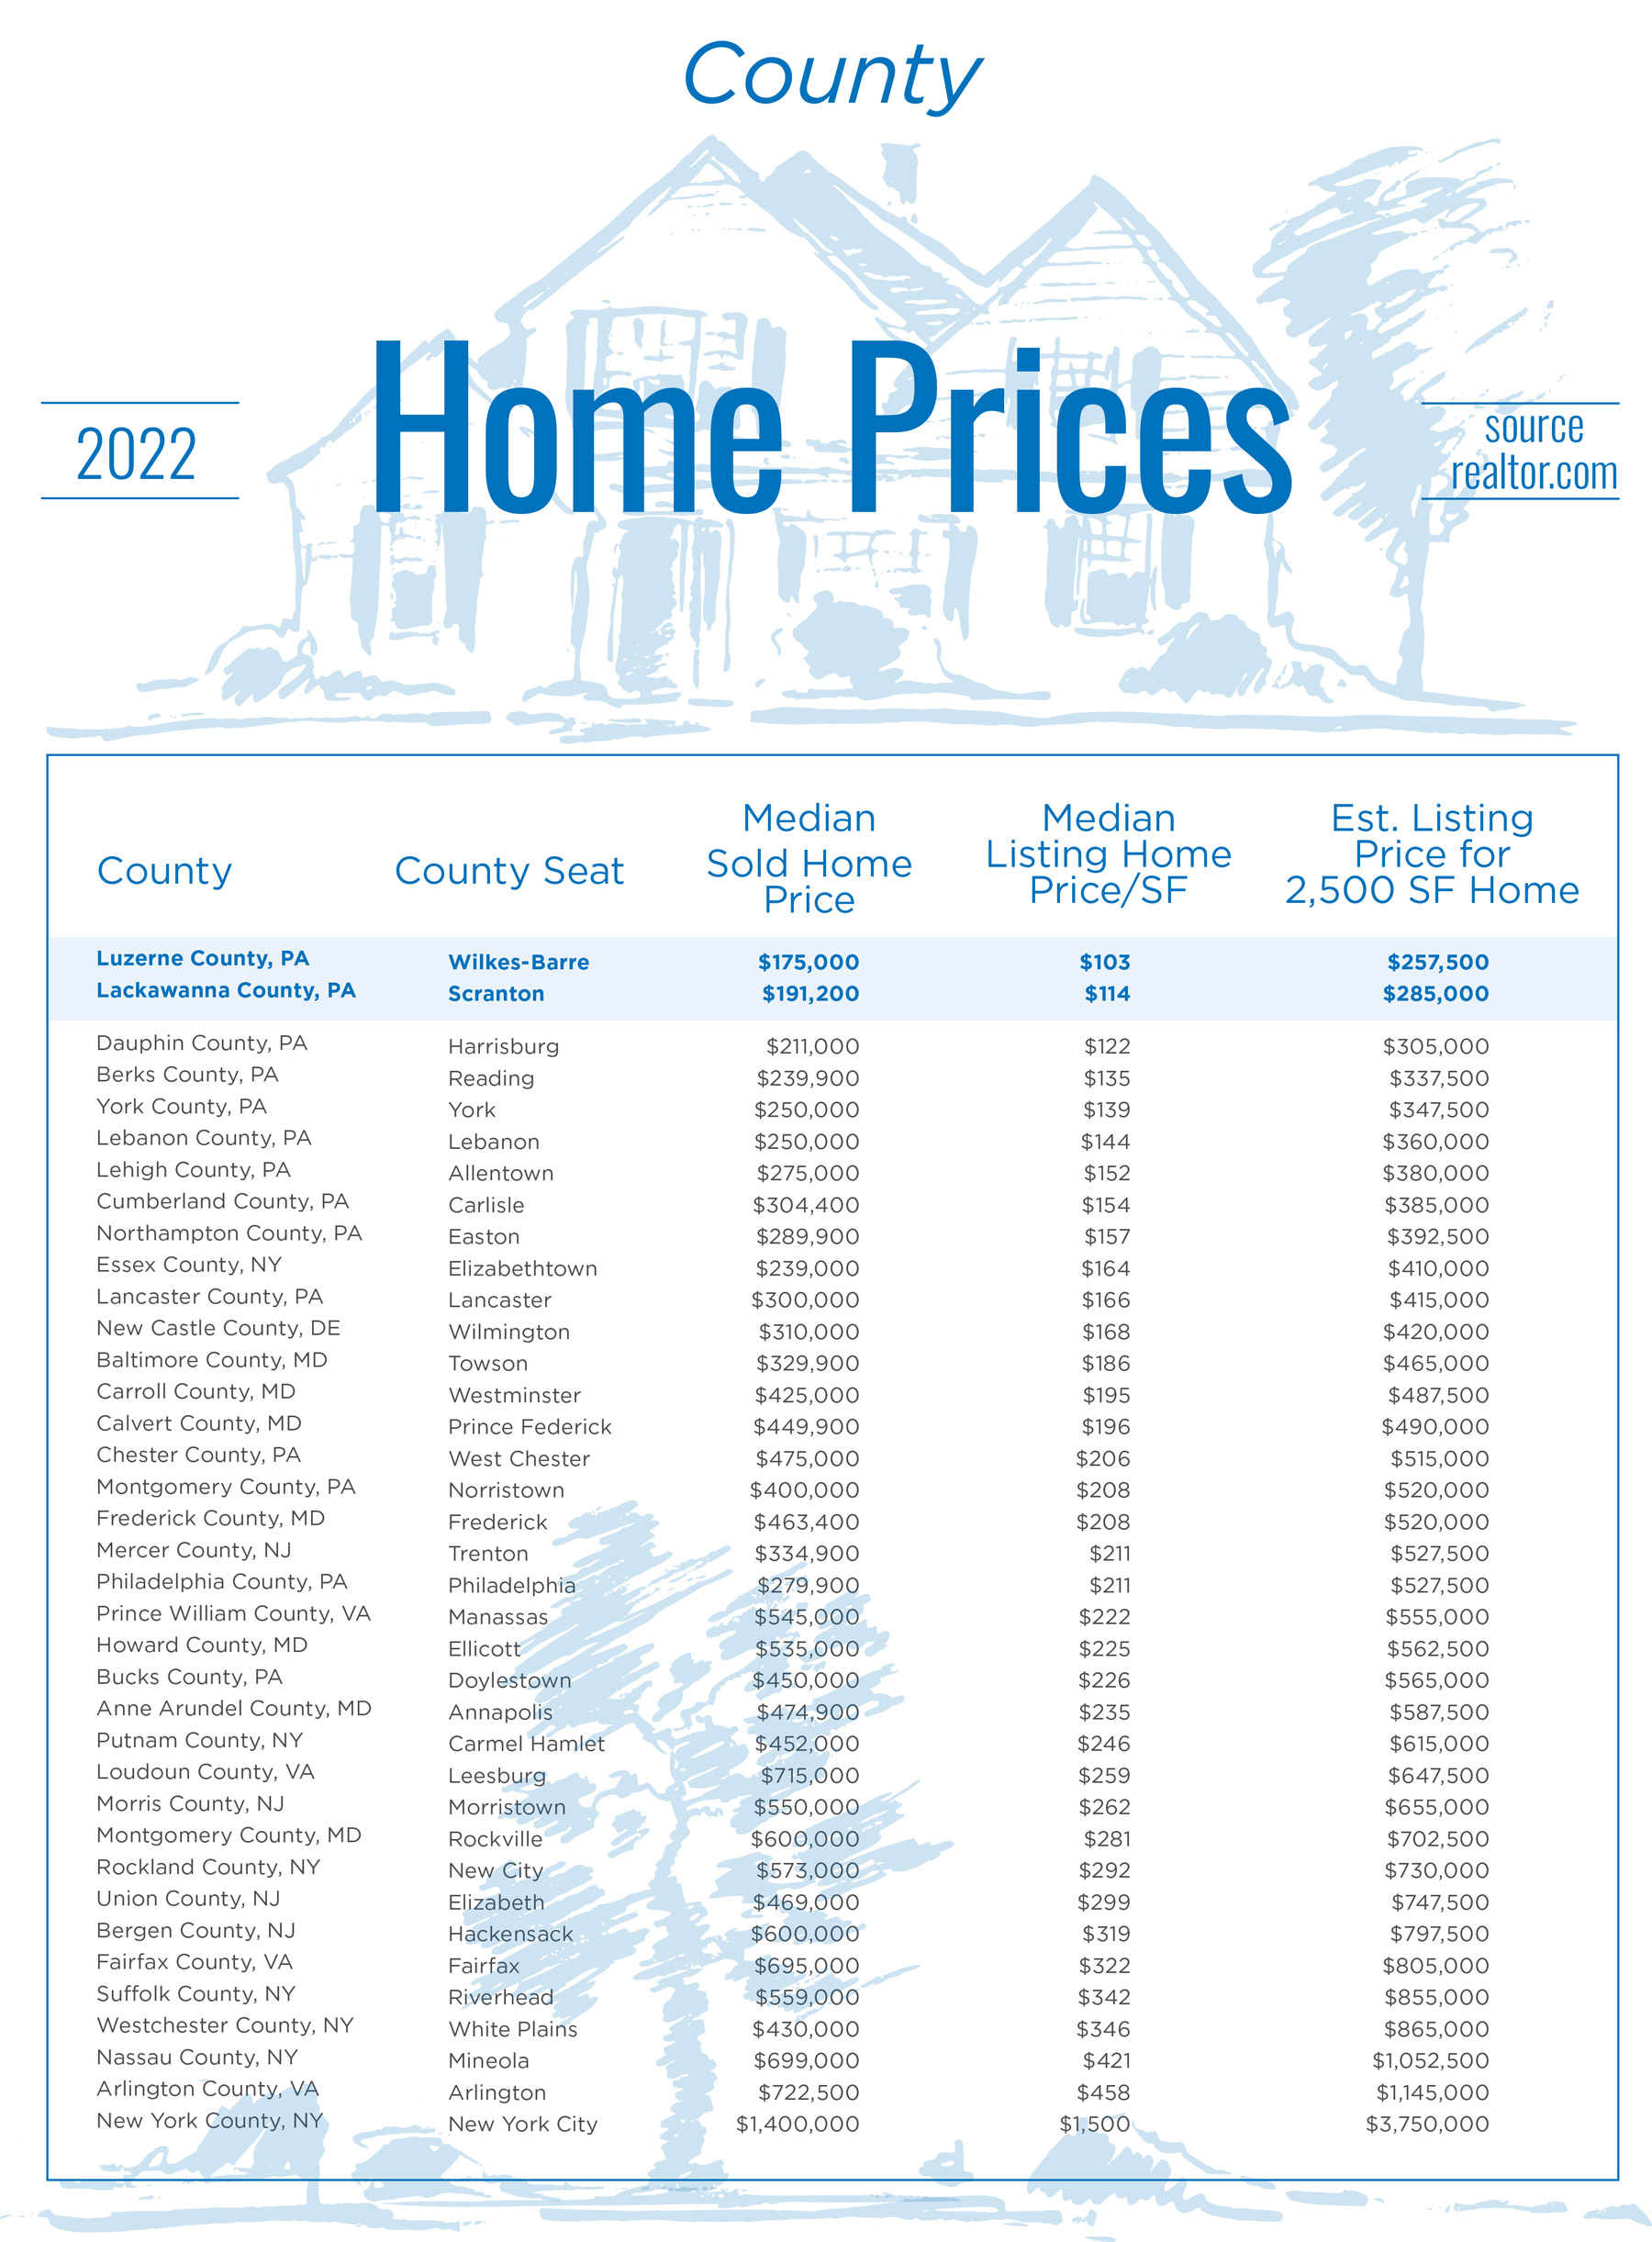 Mericle County Home Prices